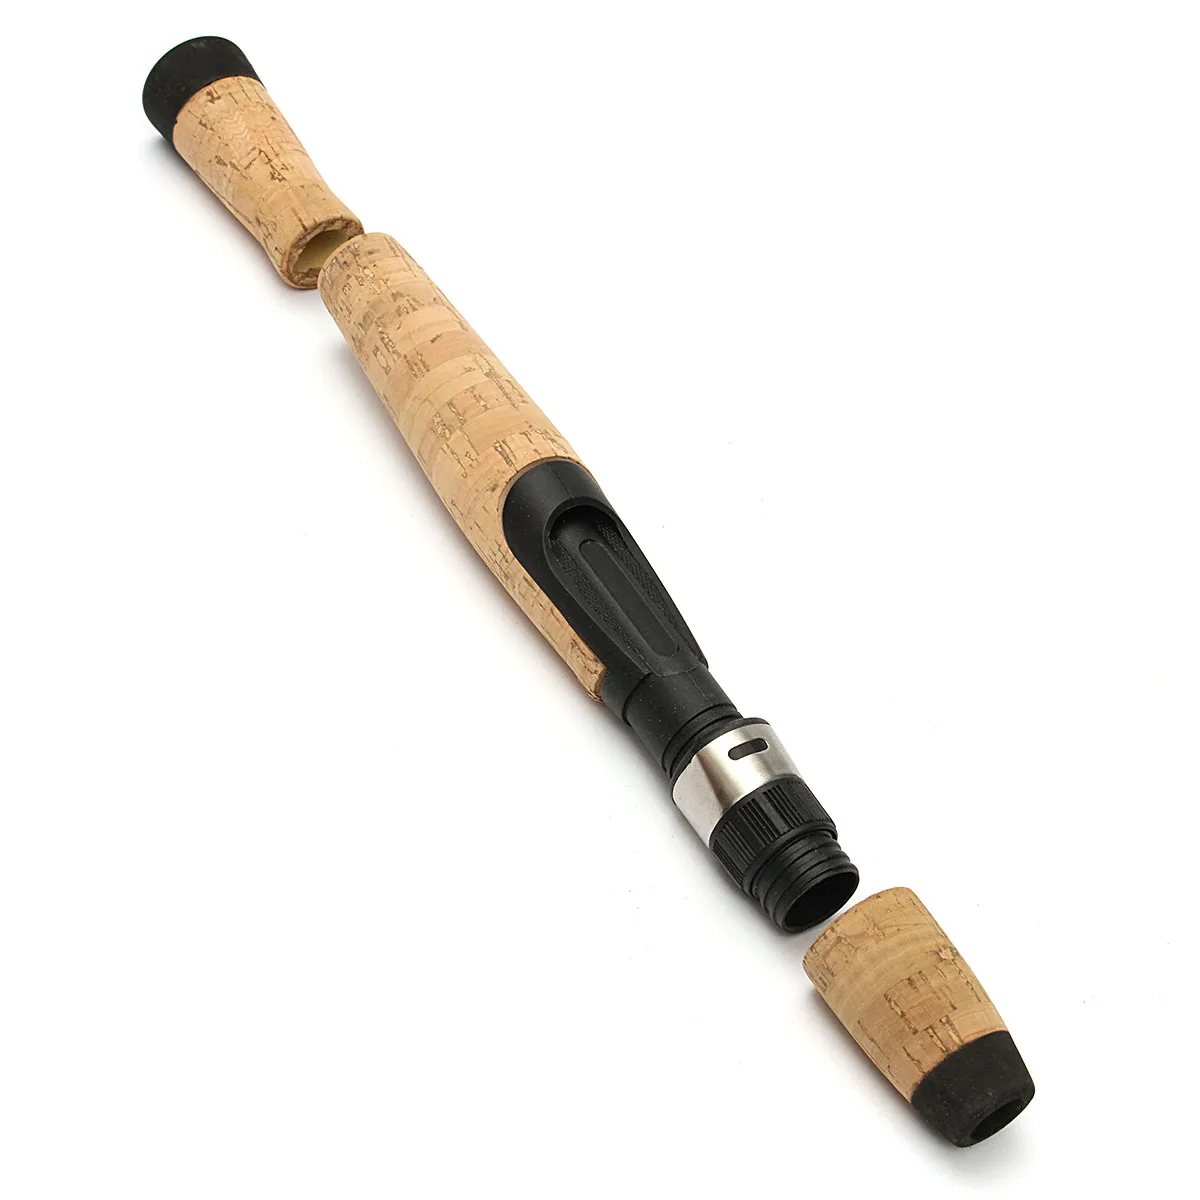 Composite Cork Fly Fishing Rod Handle Grip with Reel Seat for Rod Building